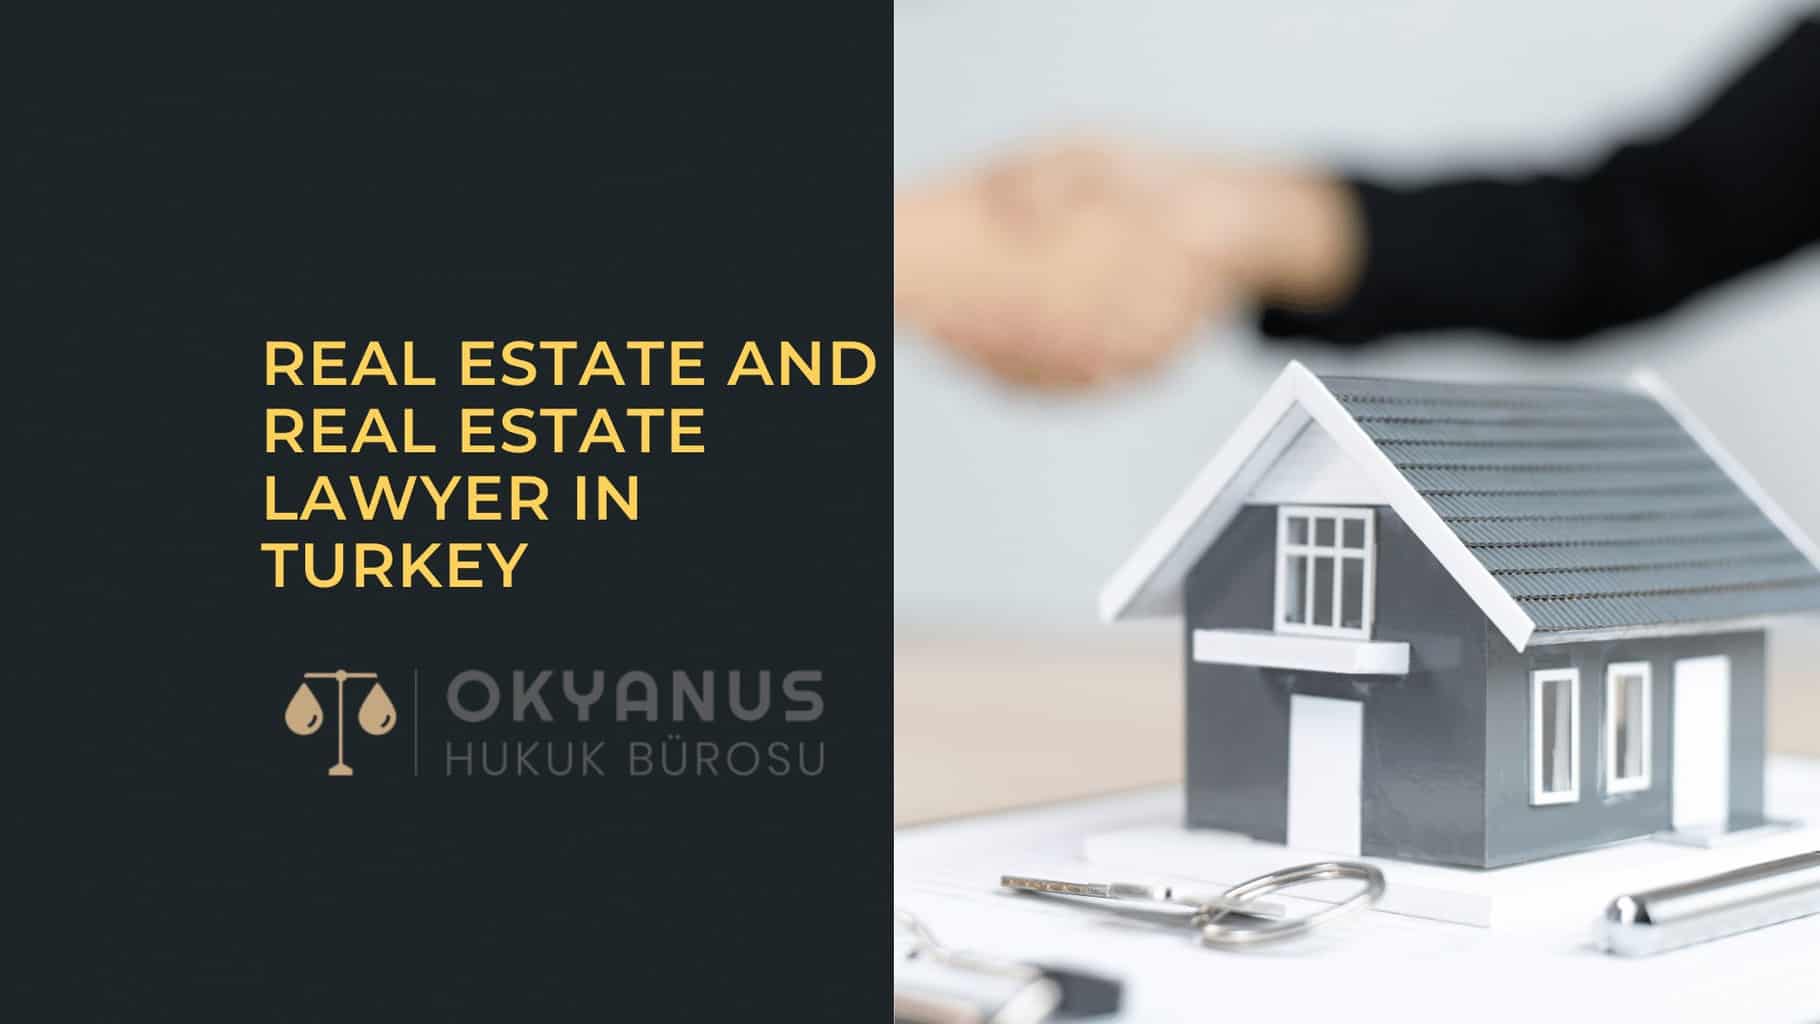 Real Estate and Real Estate Lawyer in Turkey